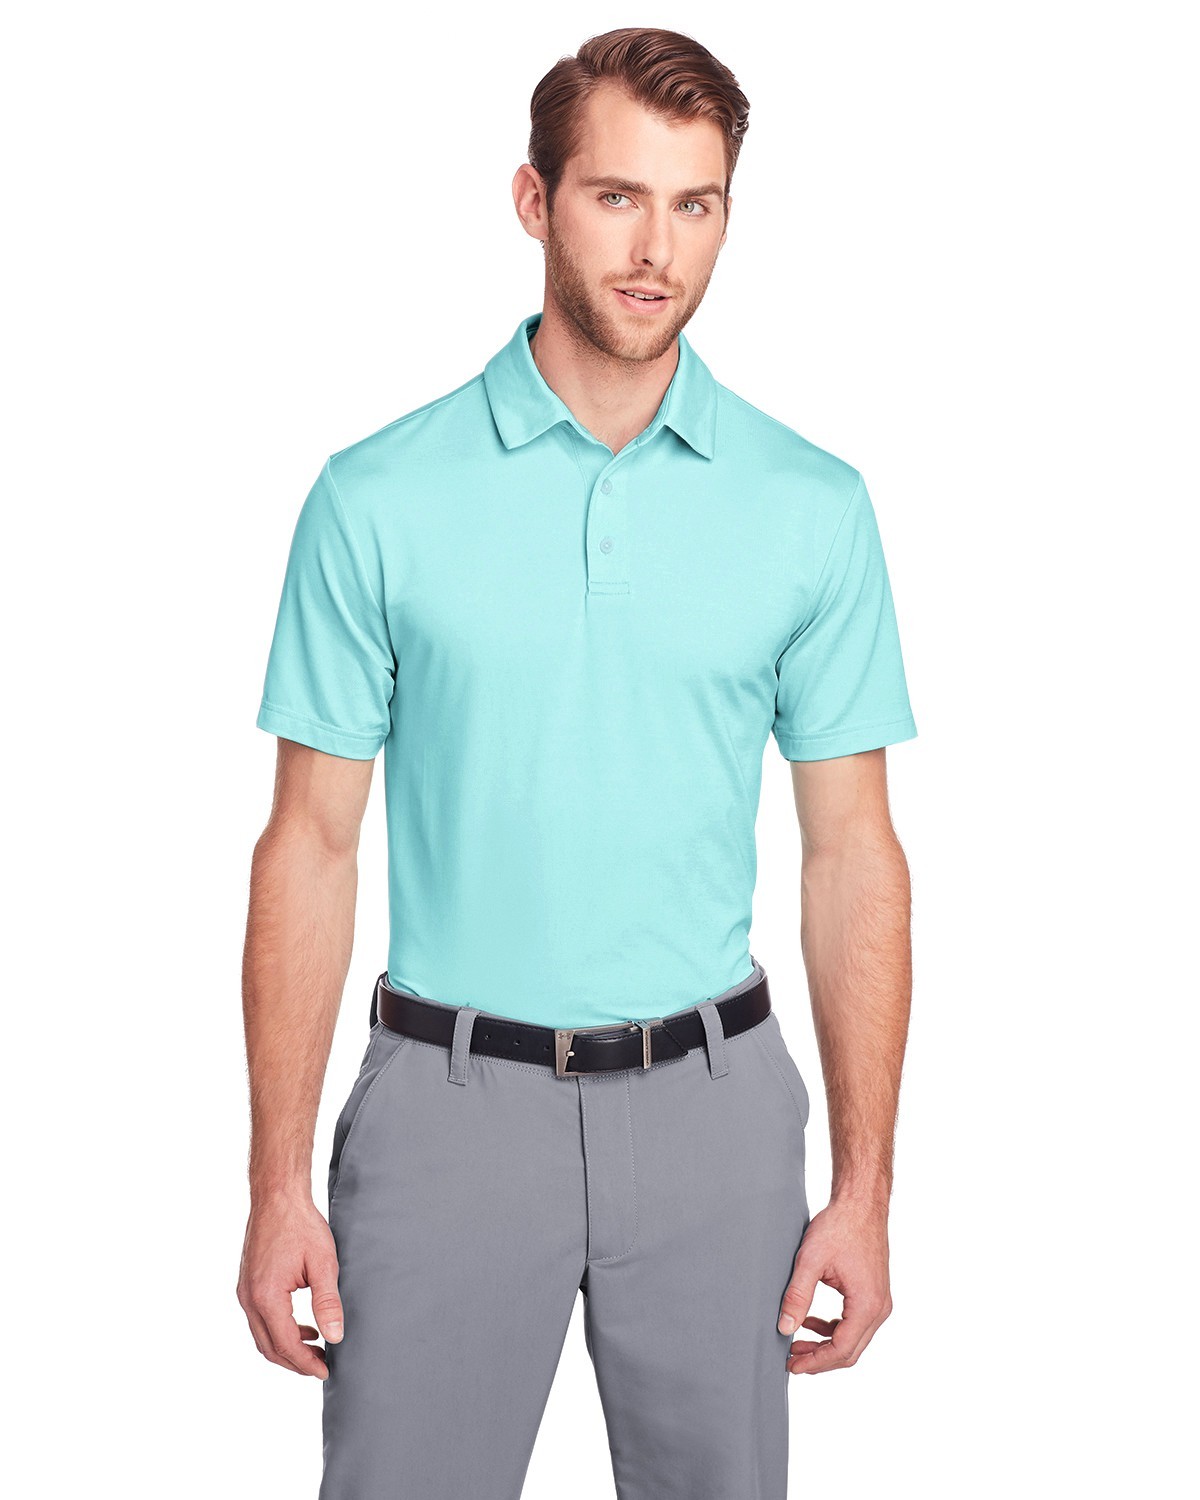 Under Armour Men's Playoff 3.0 Long Sleeve Polo - Green, MD